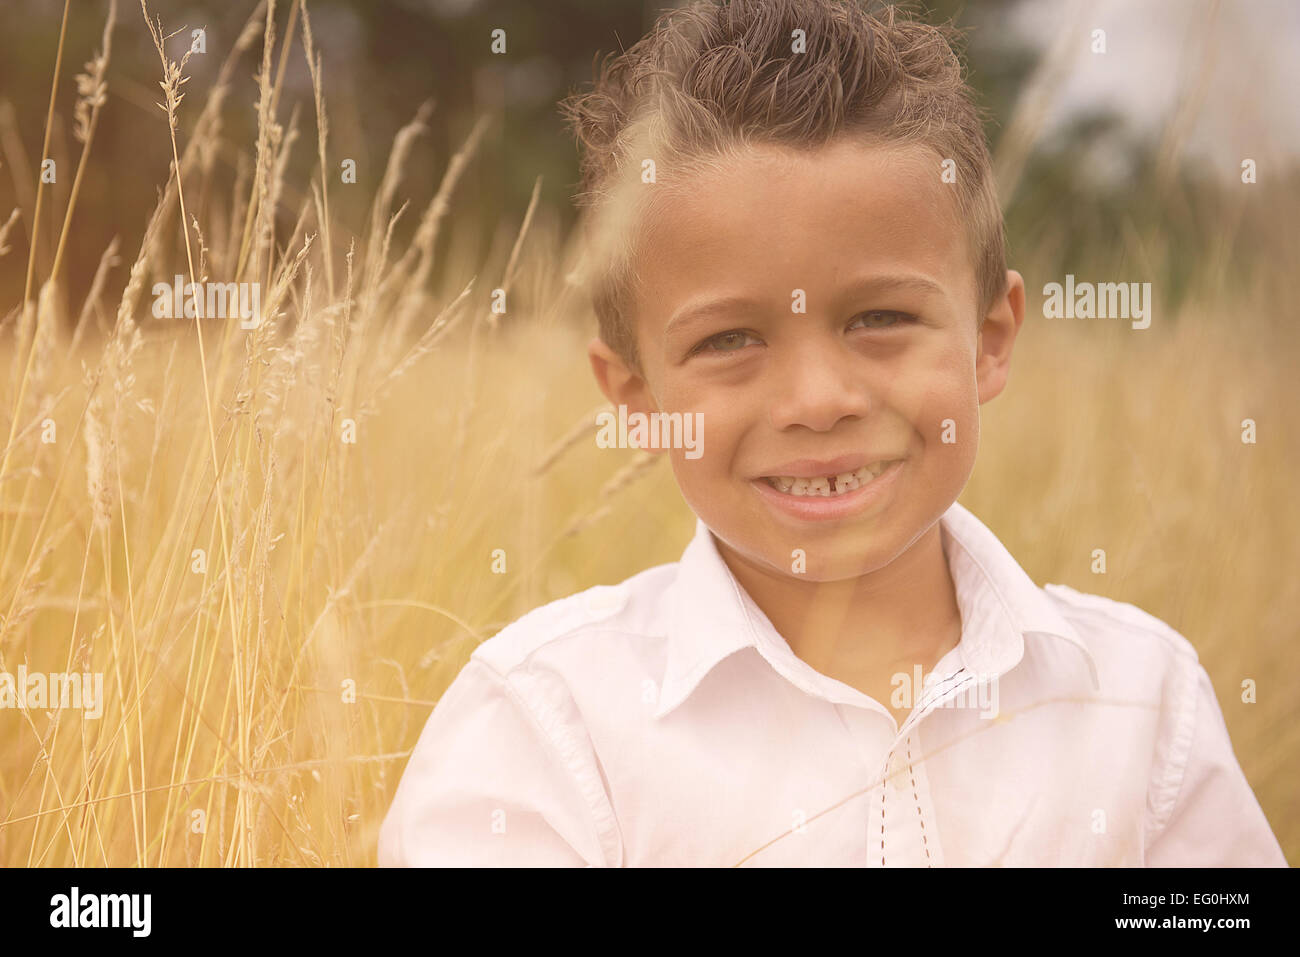 Portrait of a smiling boy standing in a field Stock Photo